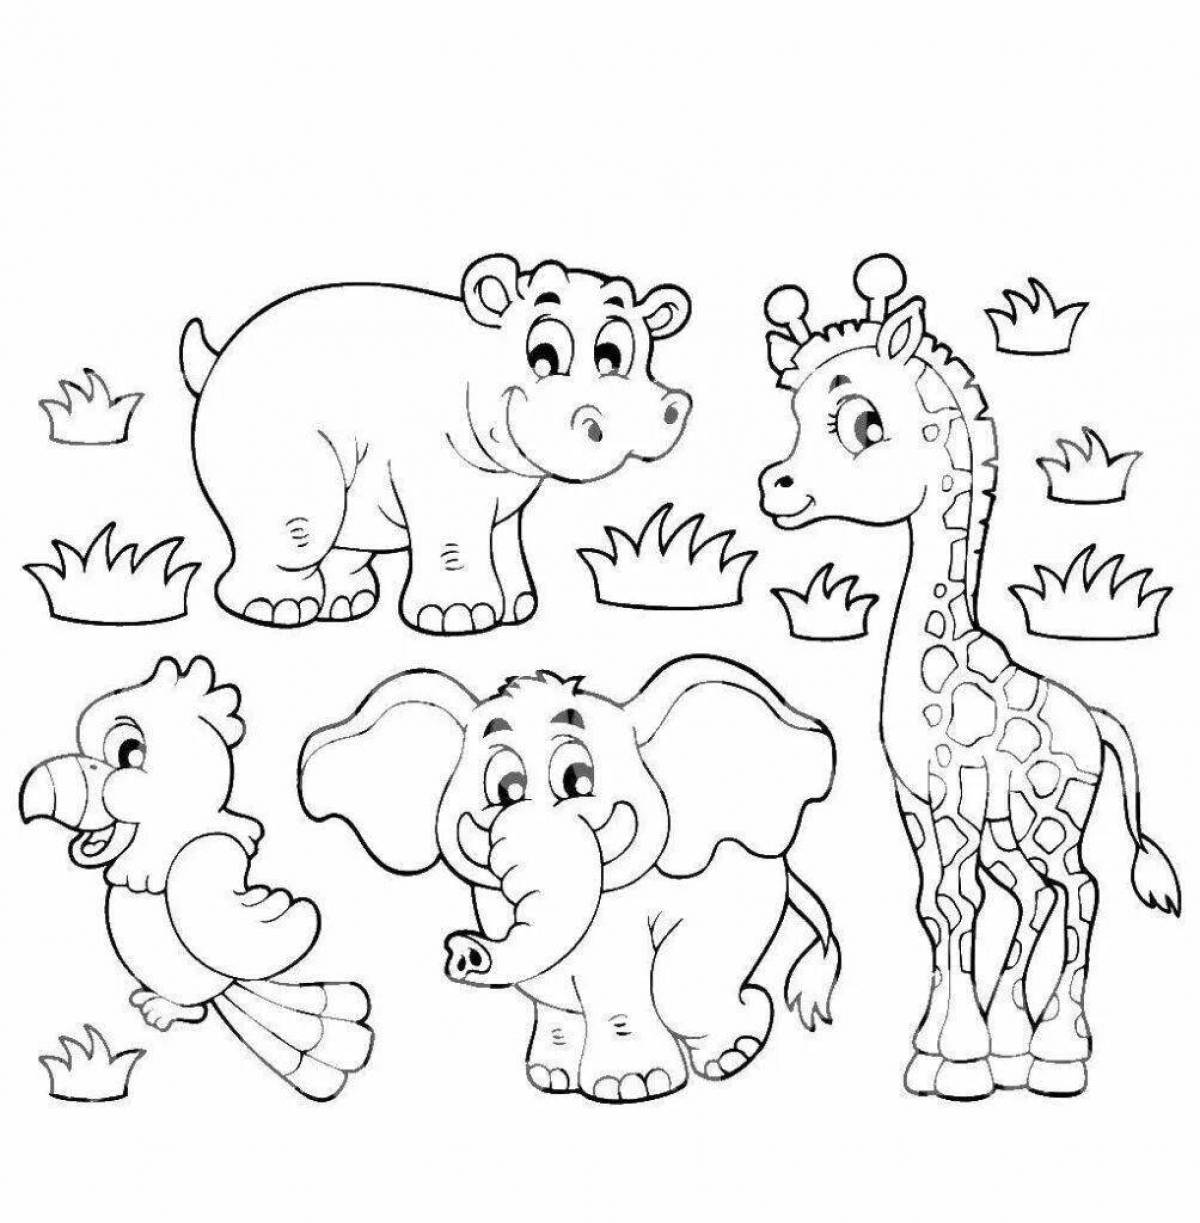 Fun African animal coloring book for 5-7 year olds